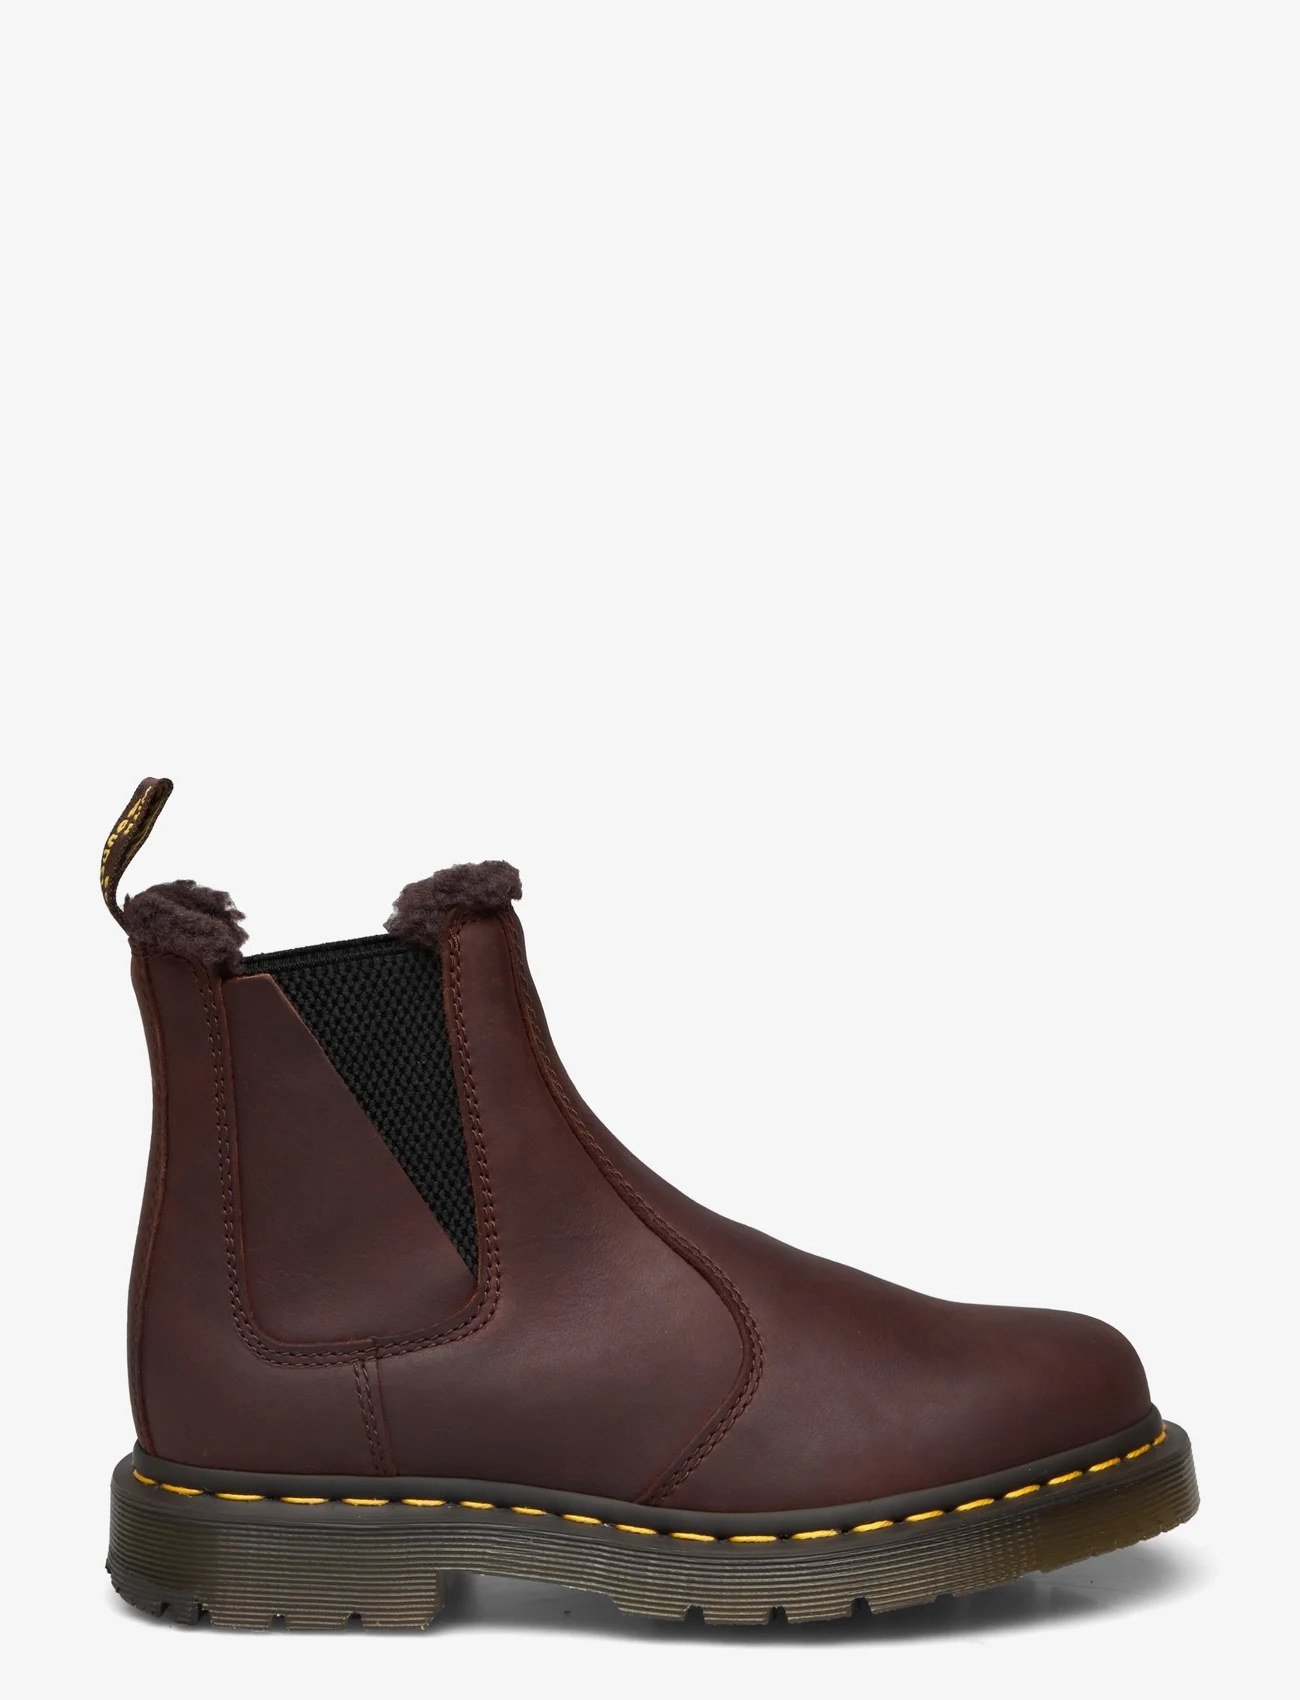 Dr. Martens - 2976 Wg Chocolate Brown Outlaw Wp - flat ankle boots - chocolate brown - 1